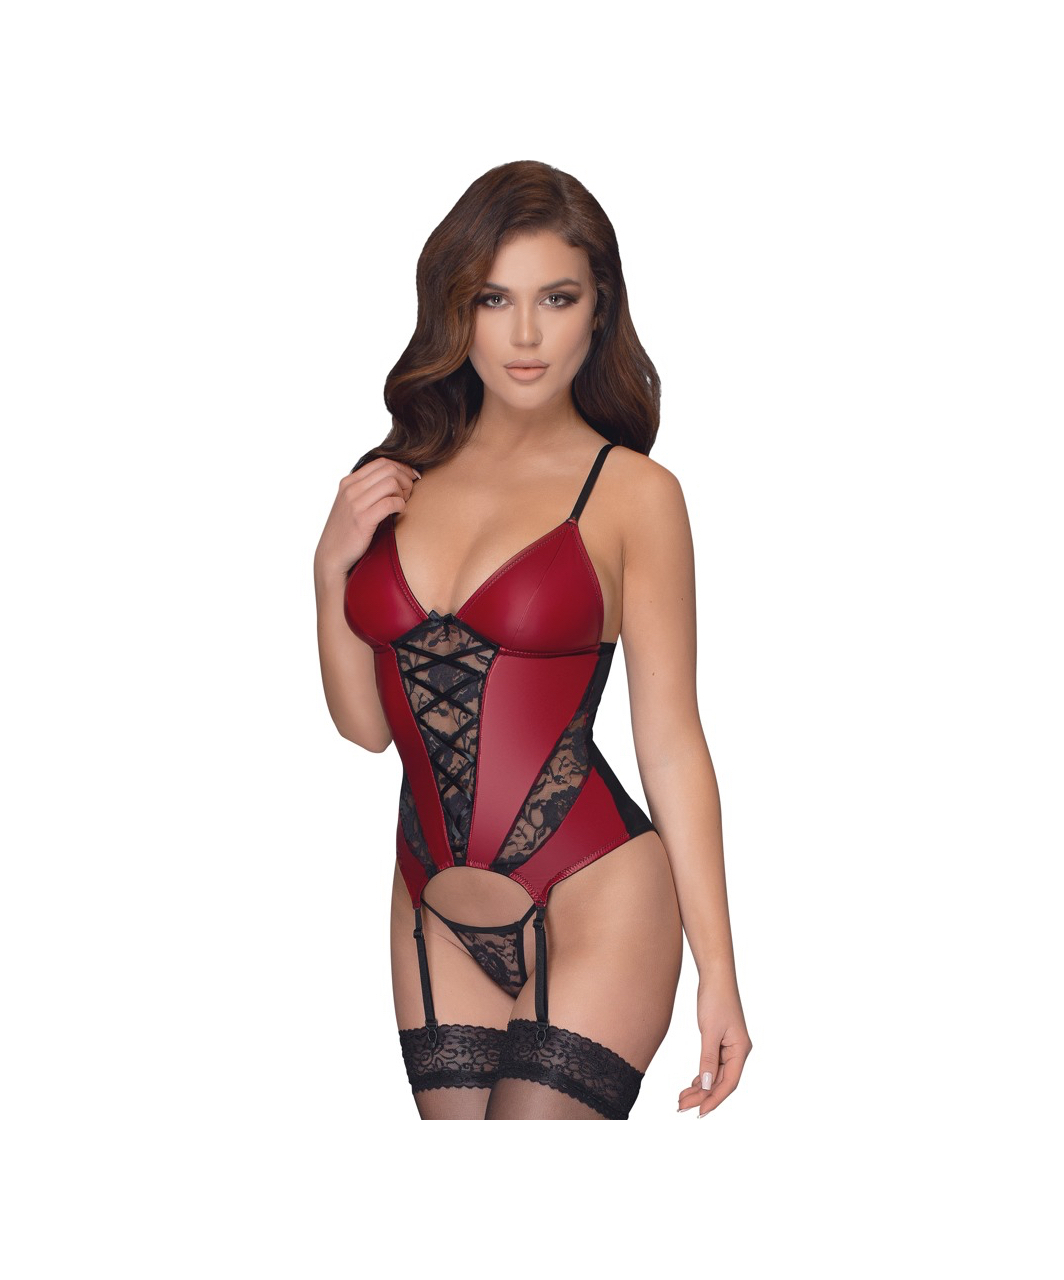 Cottelli Lingerie red basque with black lace inserts